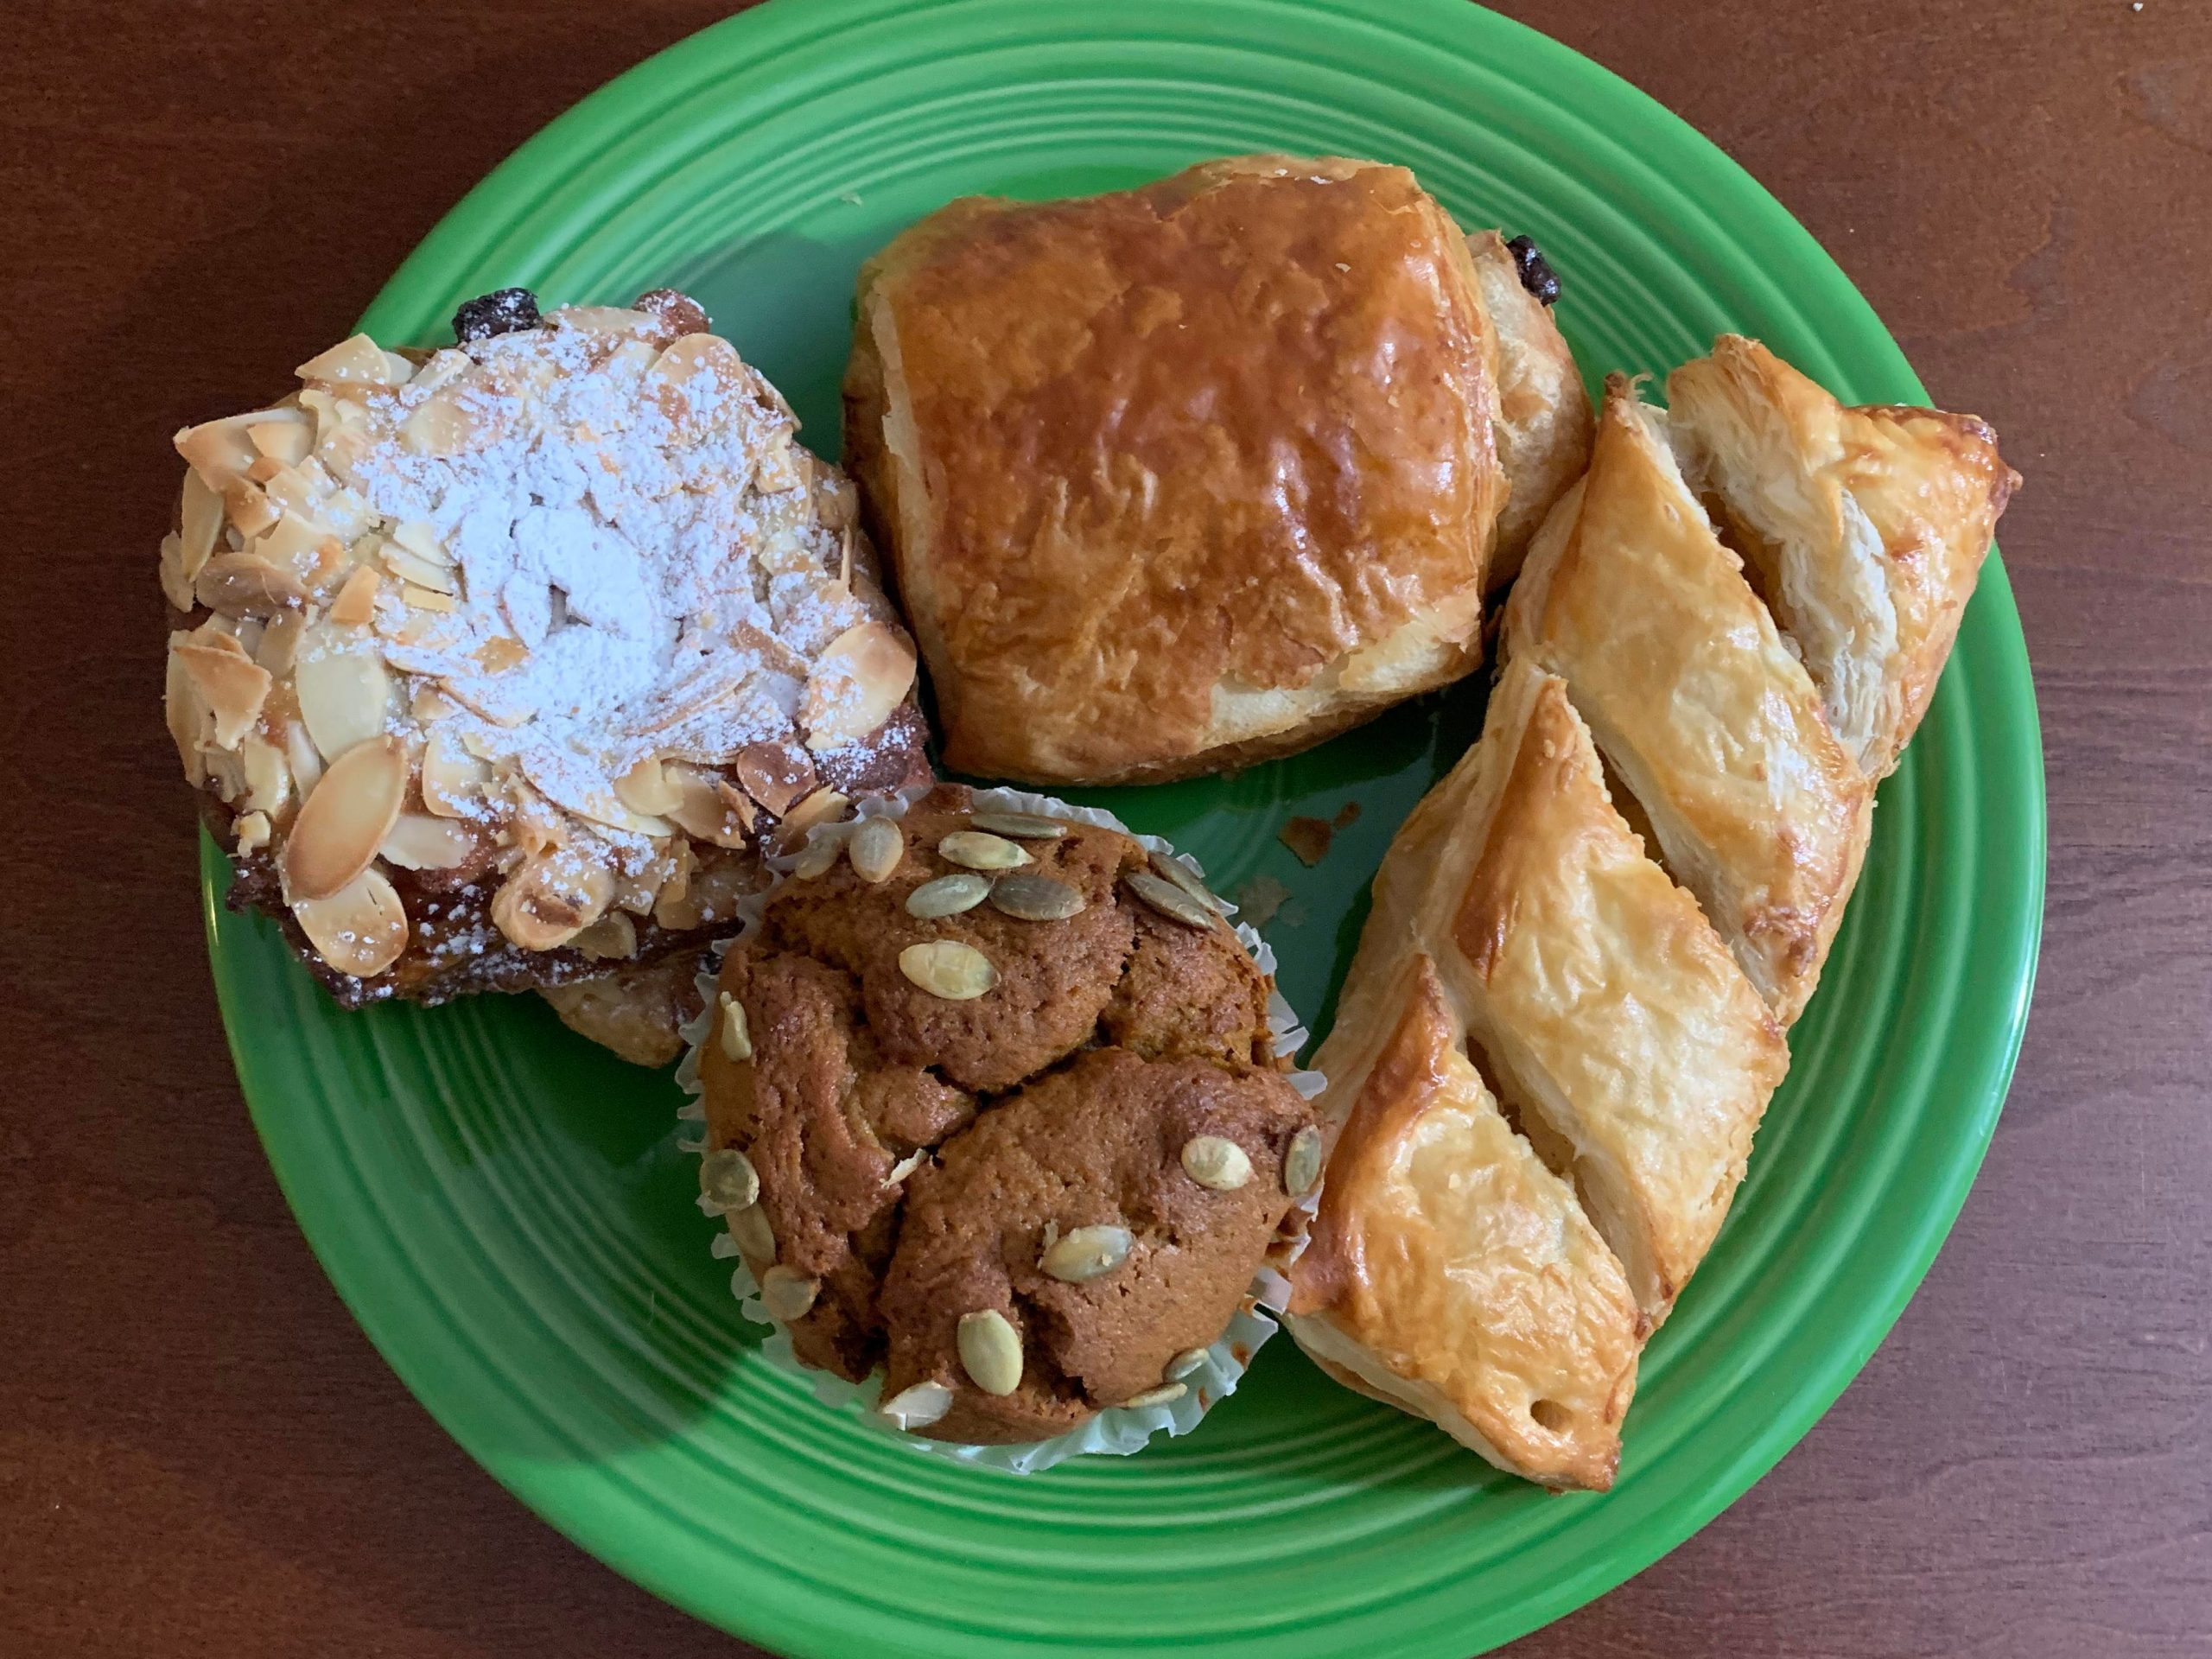 Four pastries on a green plate